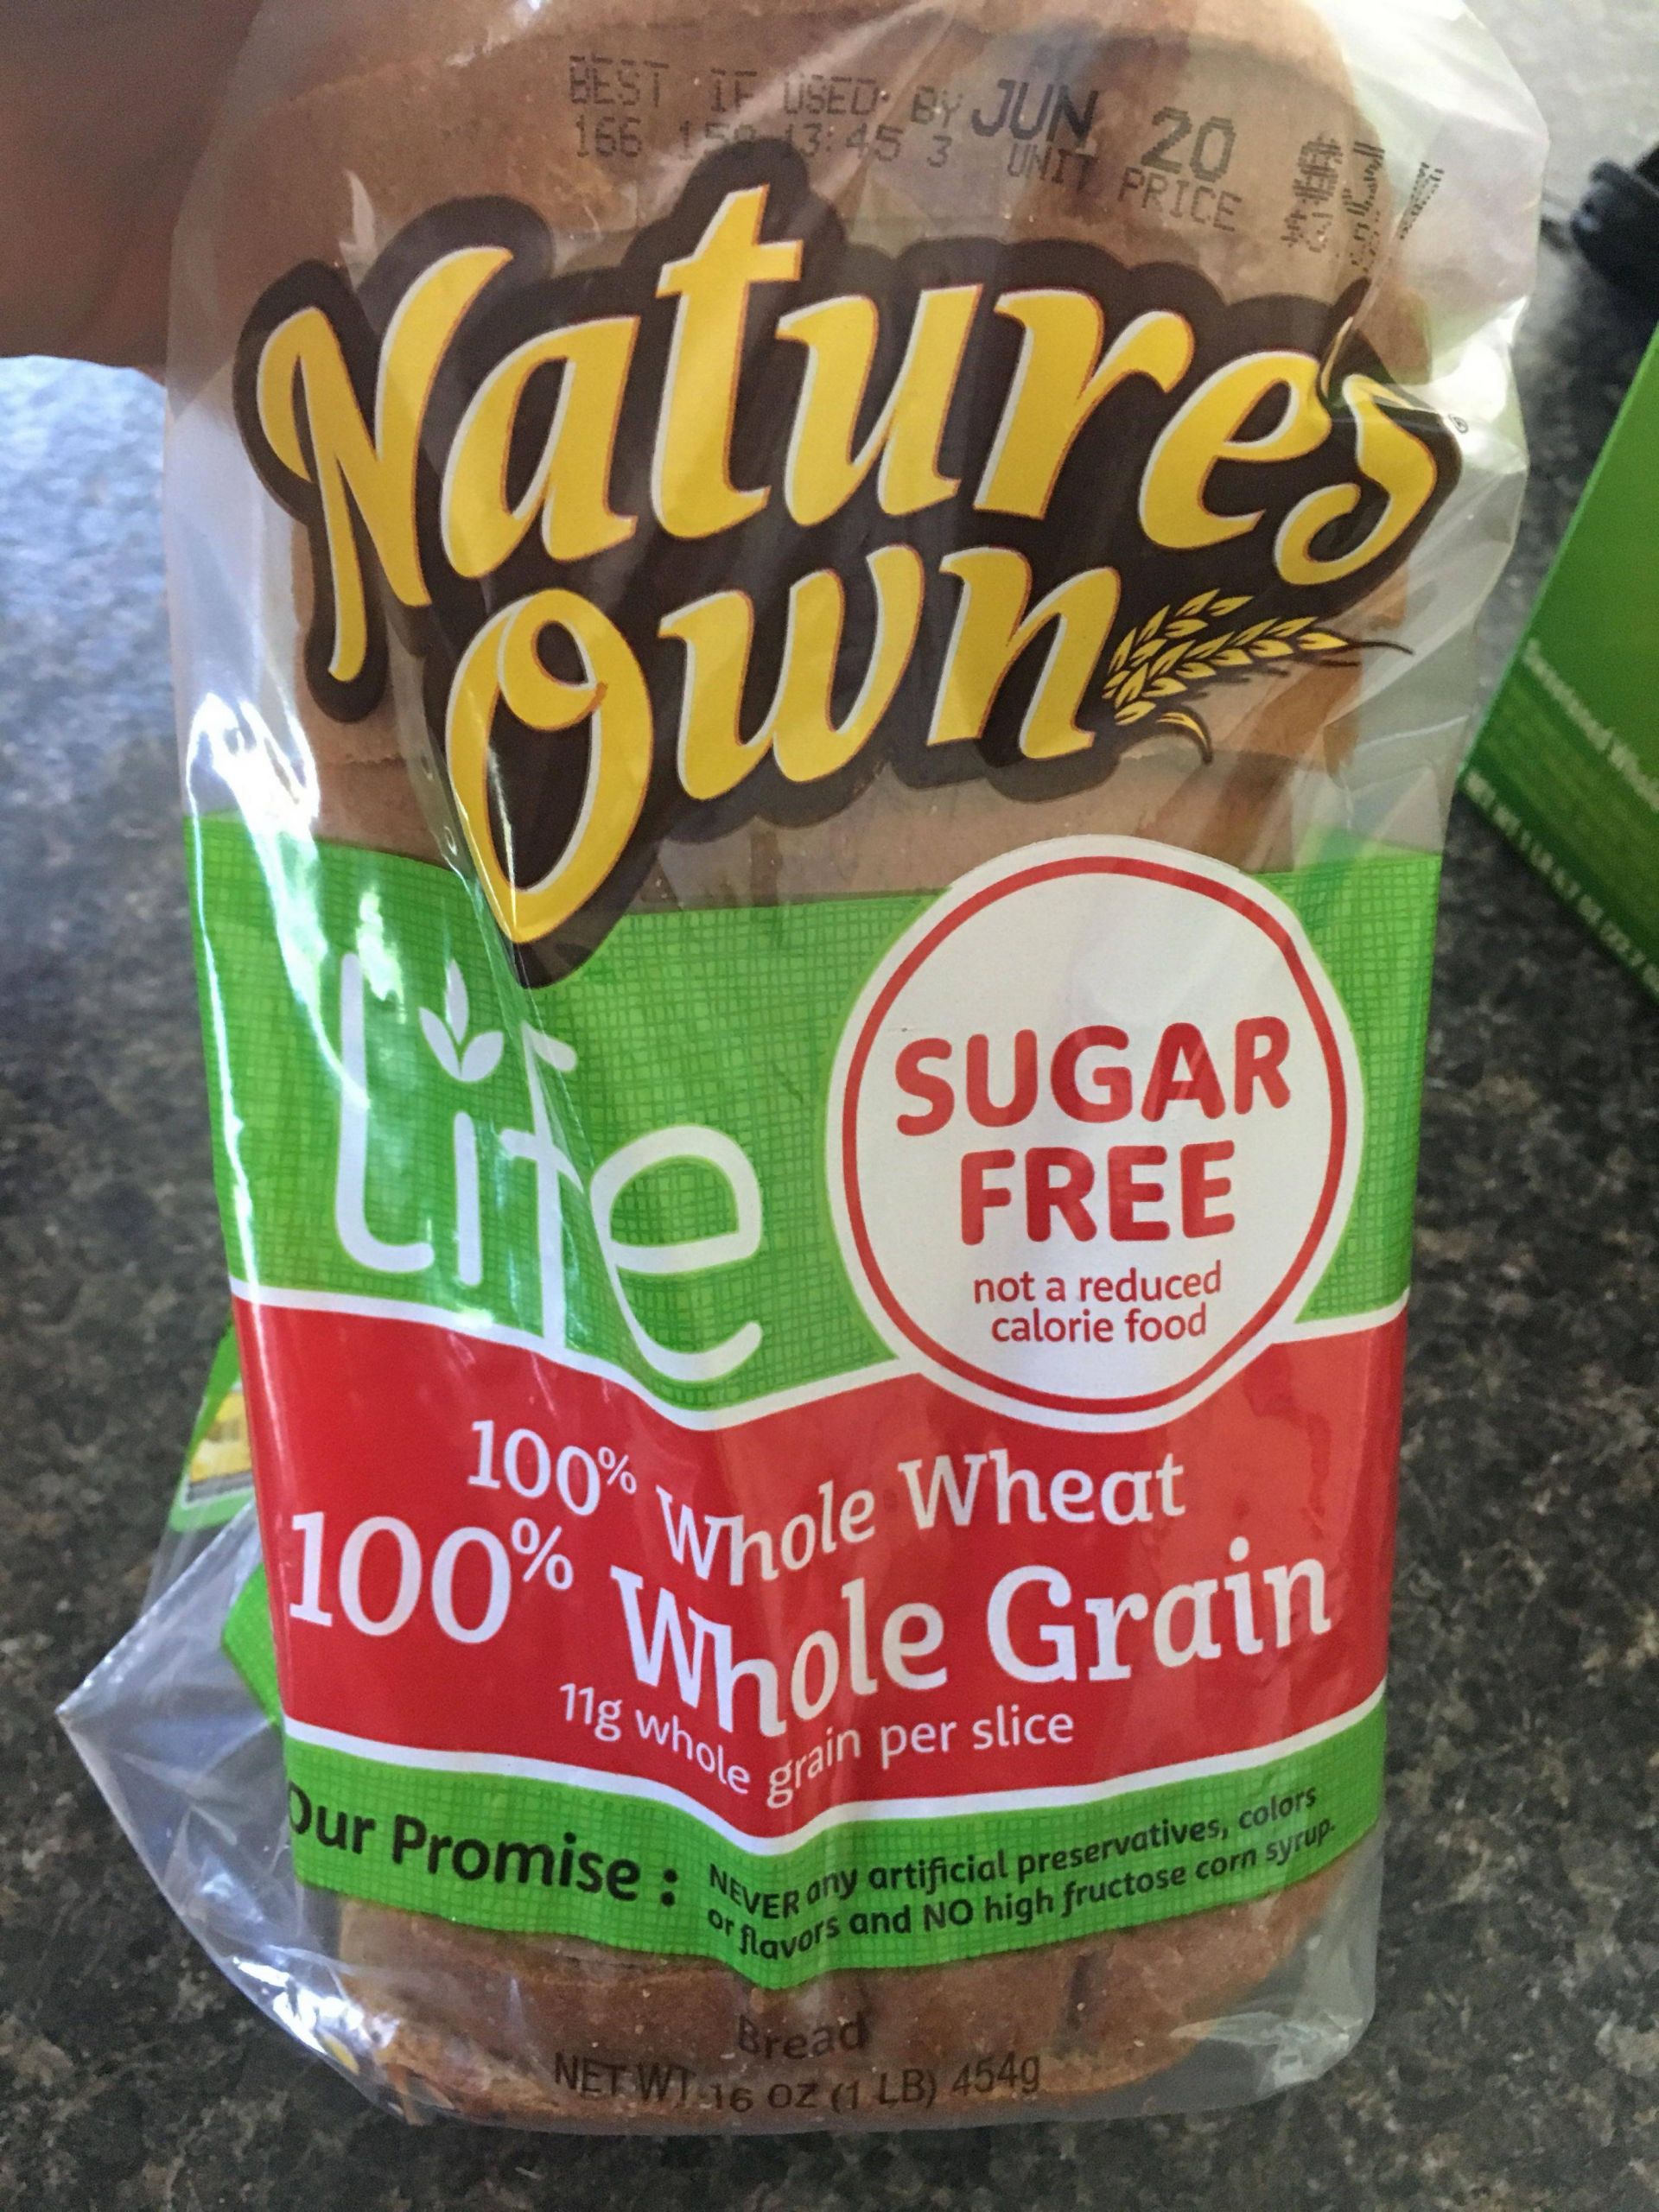 Bread Has Carbs
 New bread from Natures Own has 9 carbs total per slice